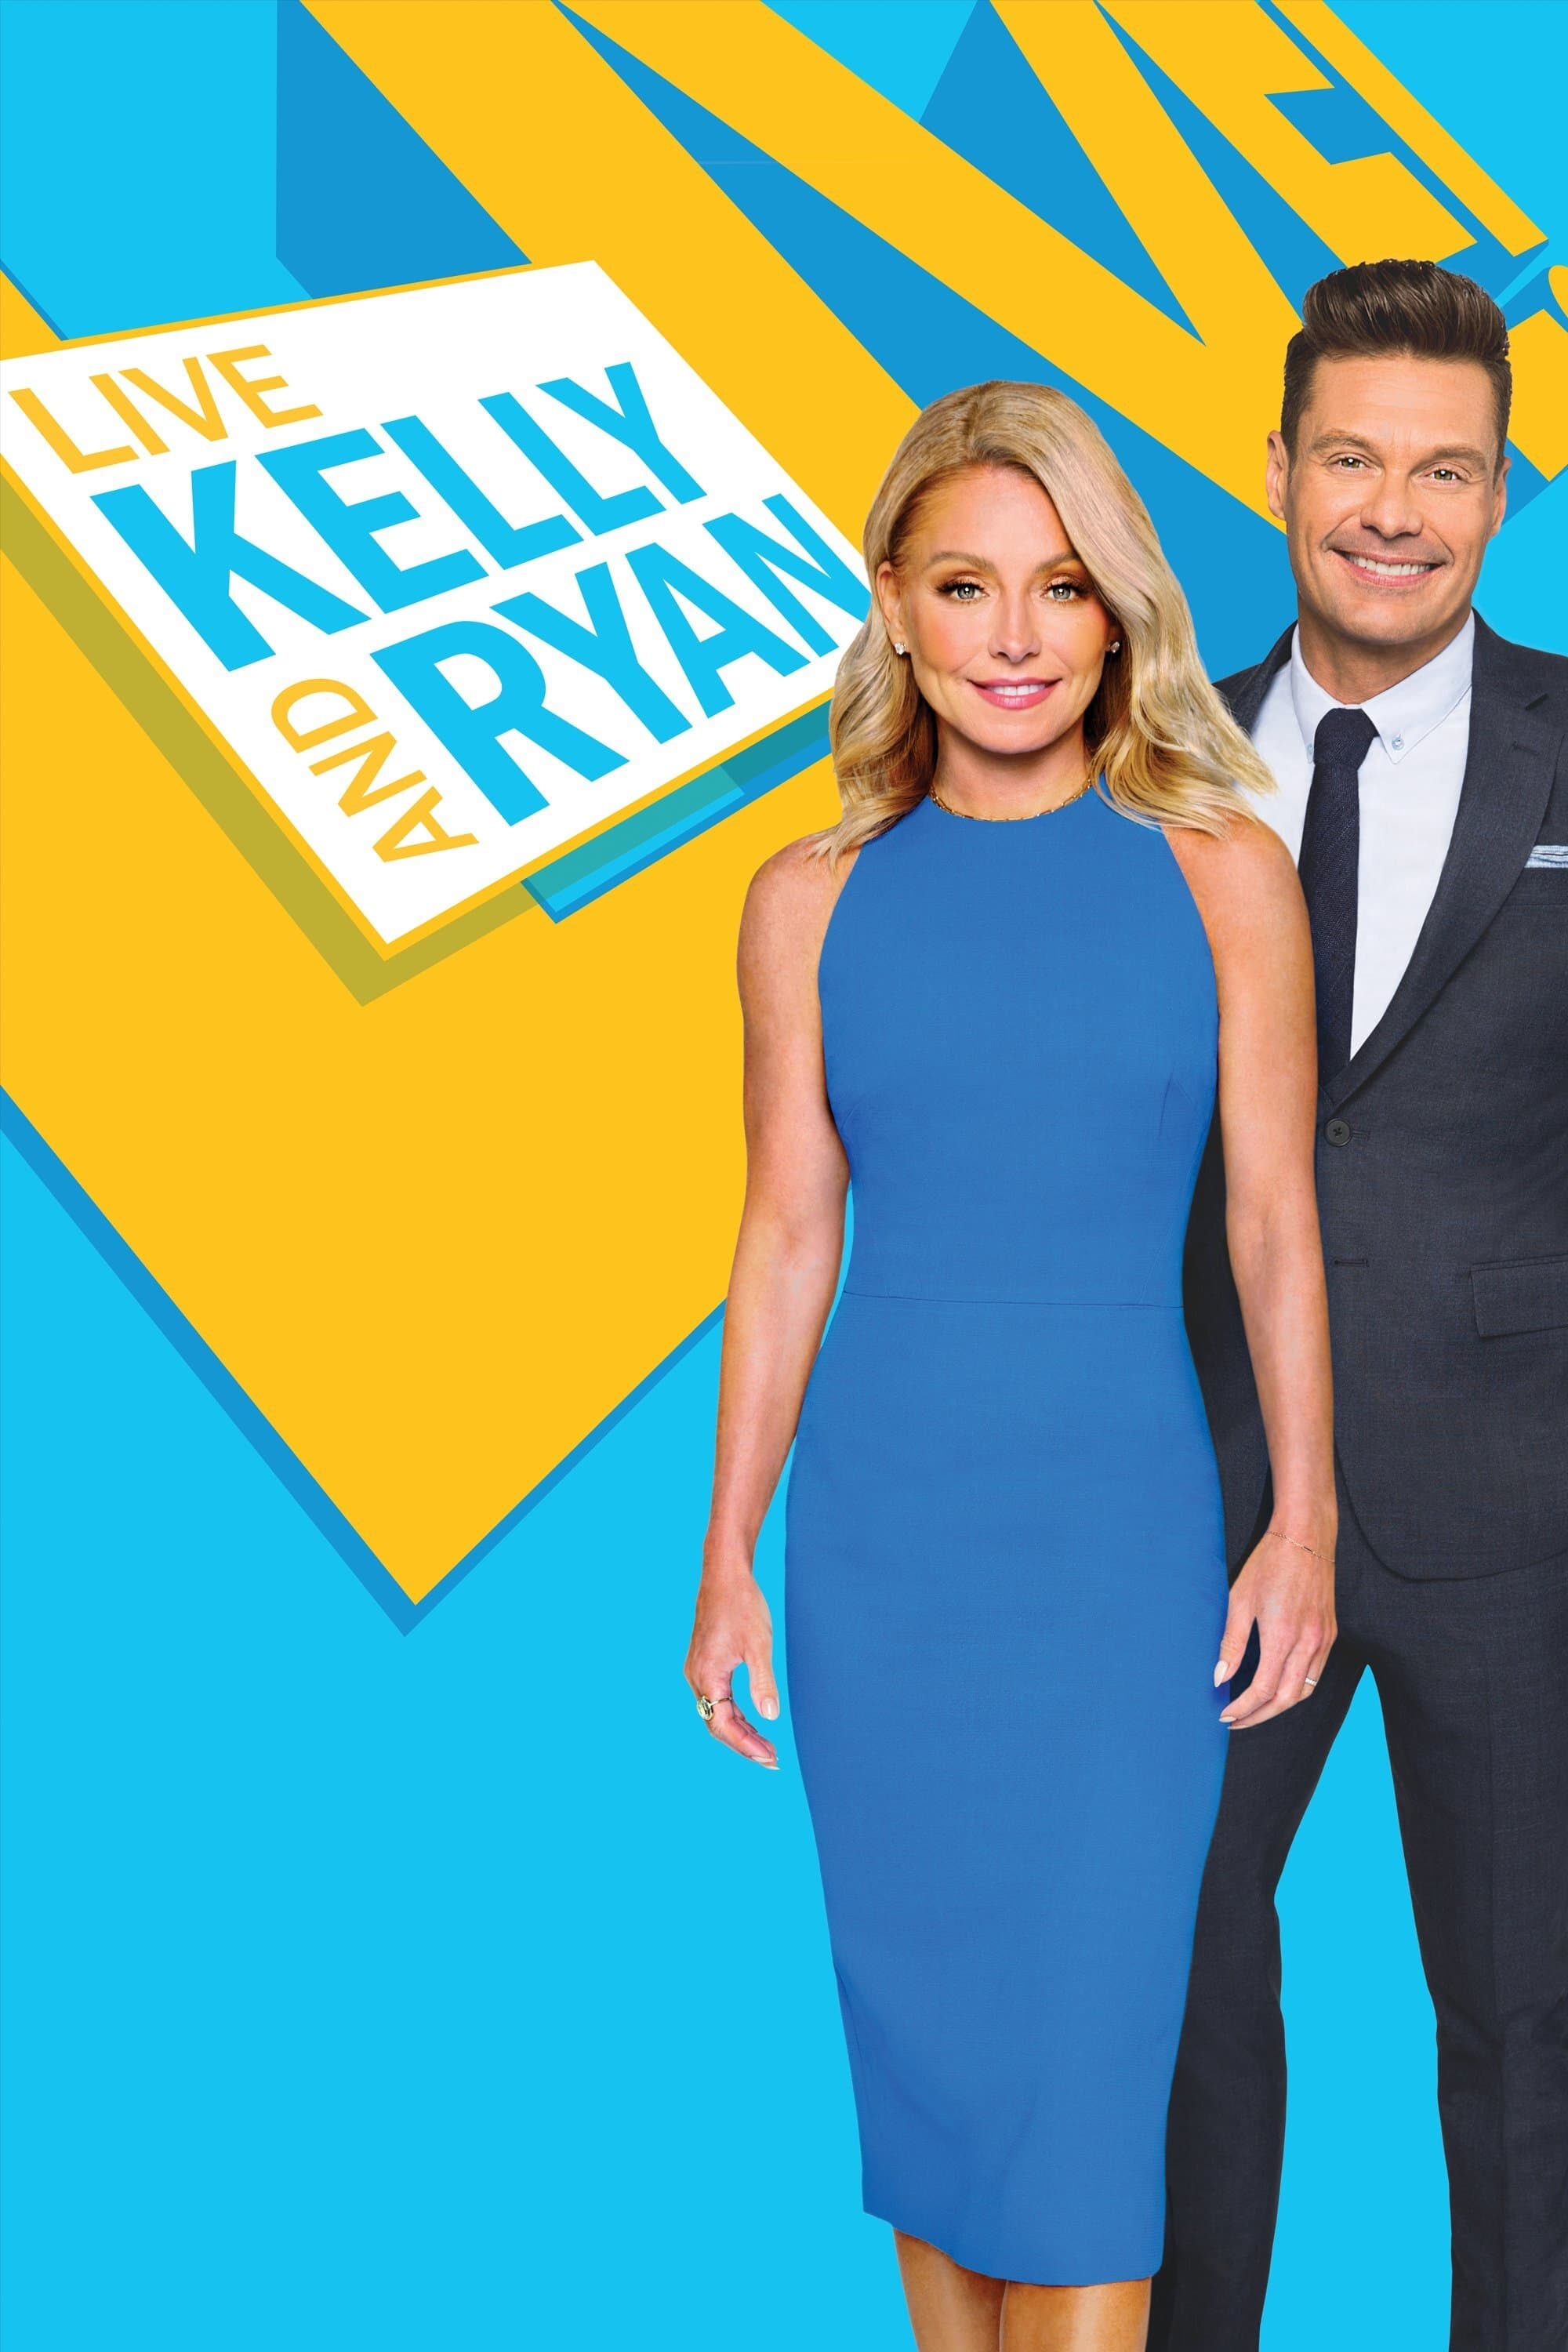 LIVE with Kelly and Ryan